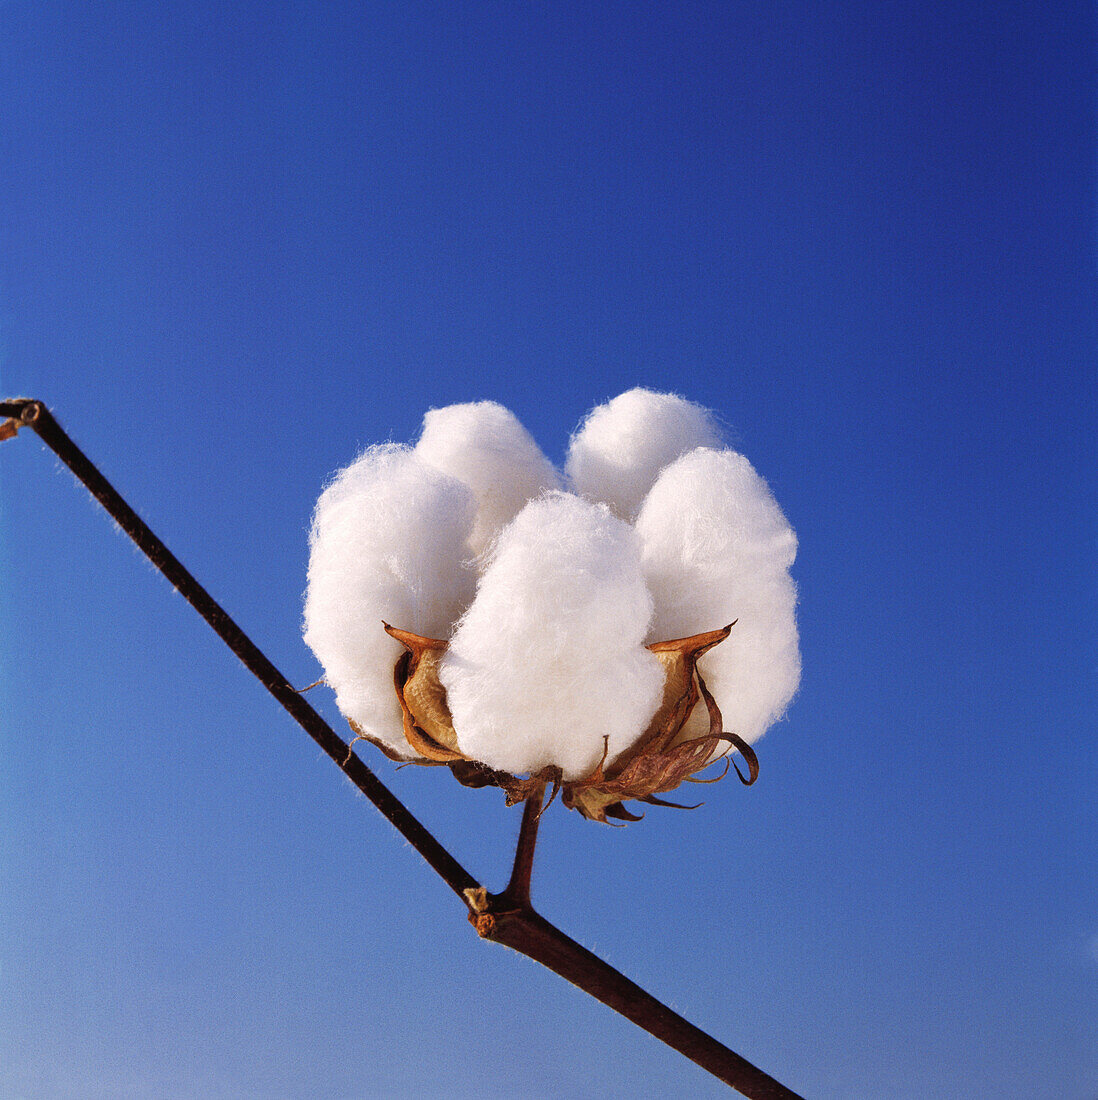 Agriculture - Closeup of an open mature 5-lock cotton boll, ready to pick / Mississippi, USA.